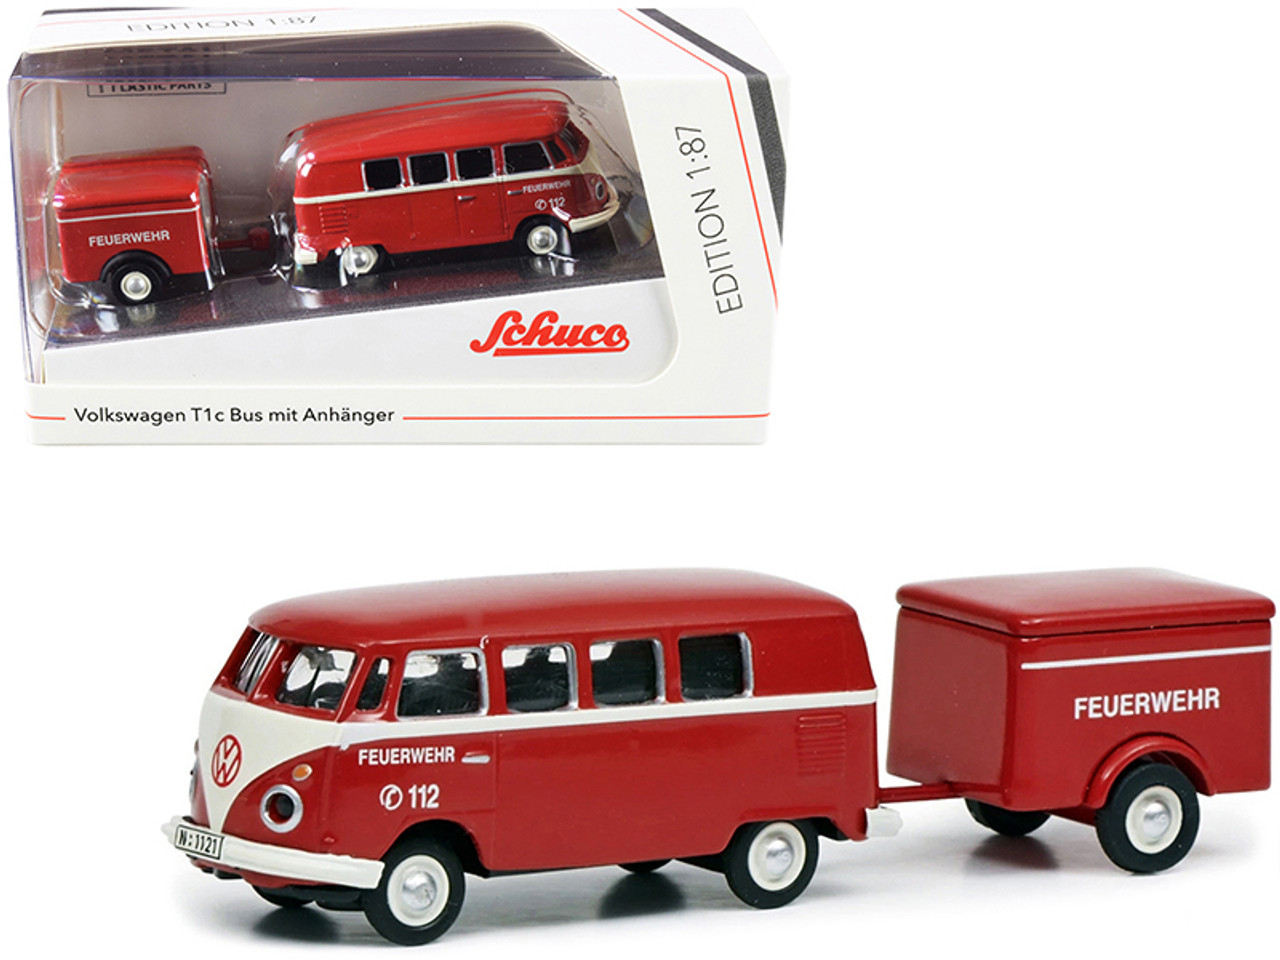 Volkswagen T1c Bus with Trailer Red and Cream "Feuerwehr" (Fire Department) 1/87 (HO) Diecast Models by Schuco